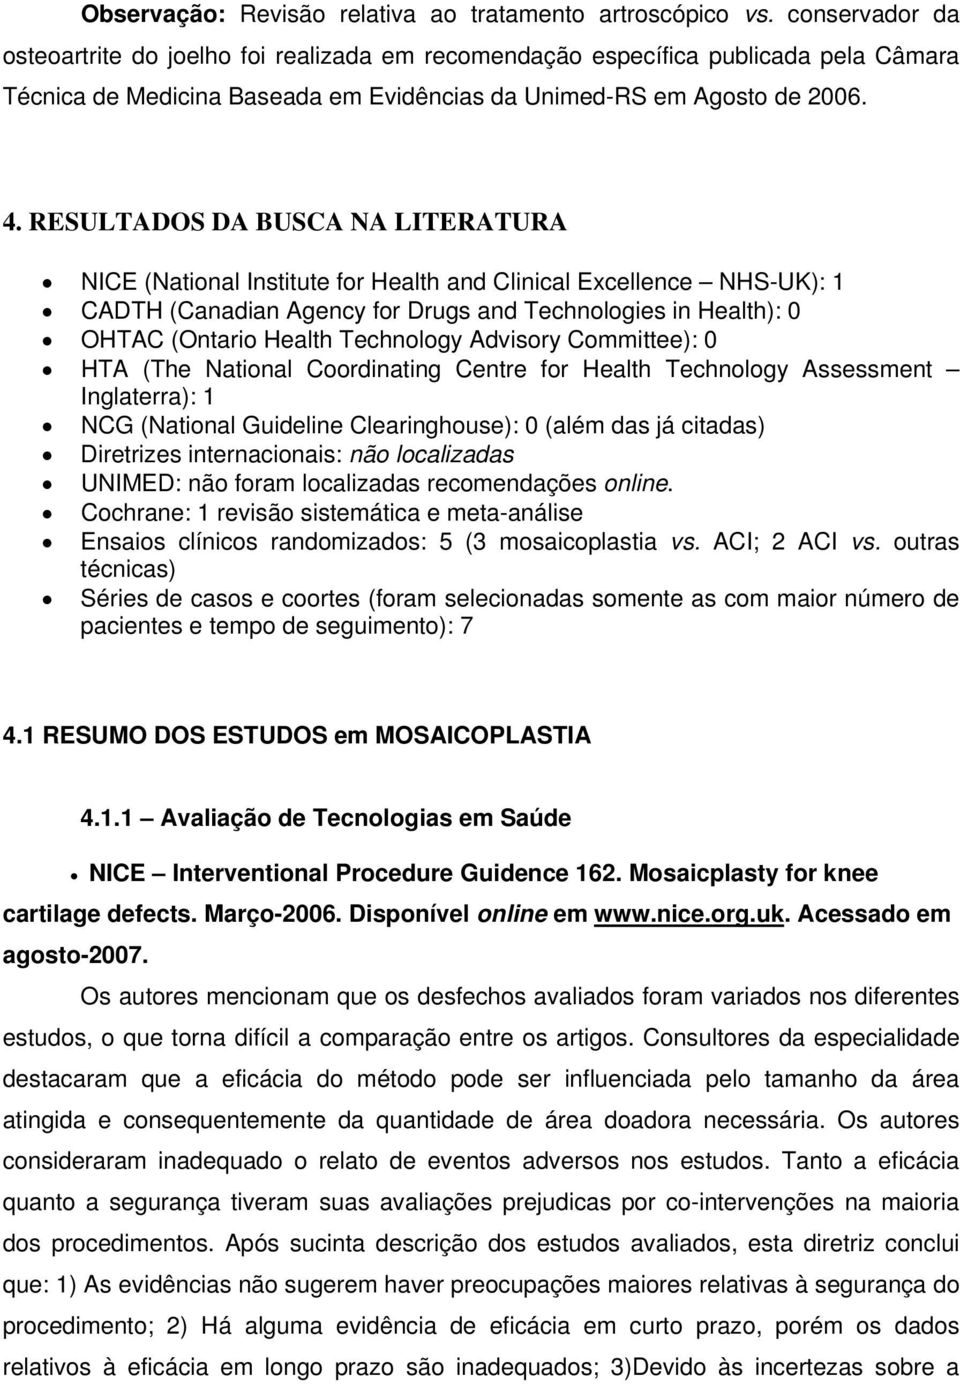 RESULTADOS DA BUSCA NA LITERATURA NICE (National Institute for Health and Clinical Excellence NHS-UK): 1 CADTH (Canadian Agency for Drugs and Technologies in Health): 0 OHTAC (Ontario Health